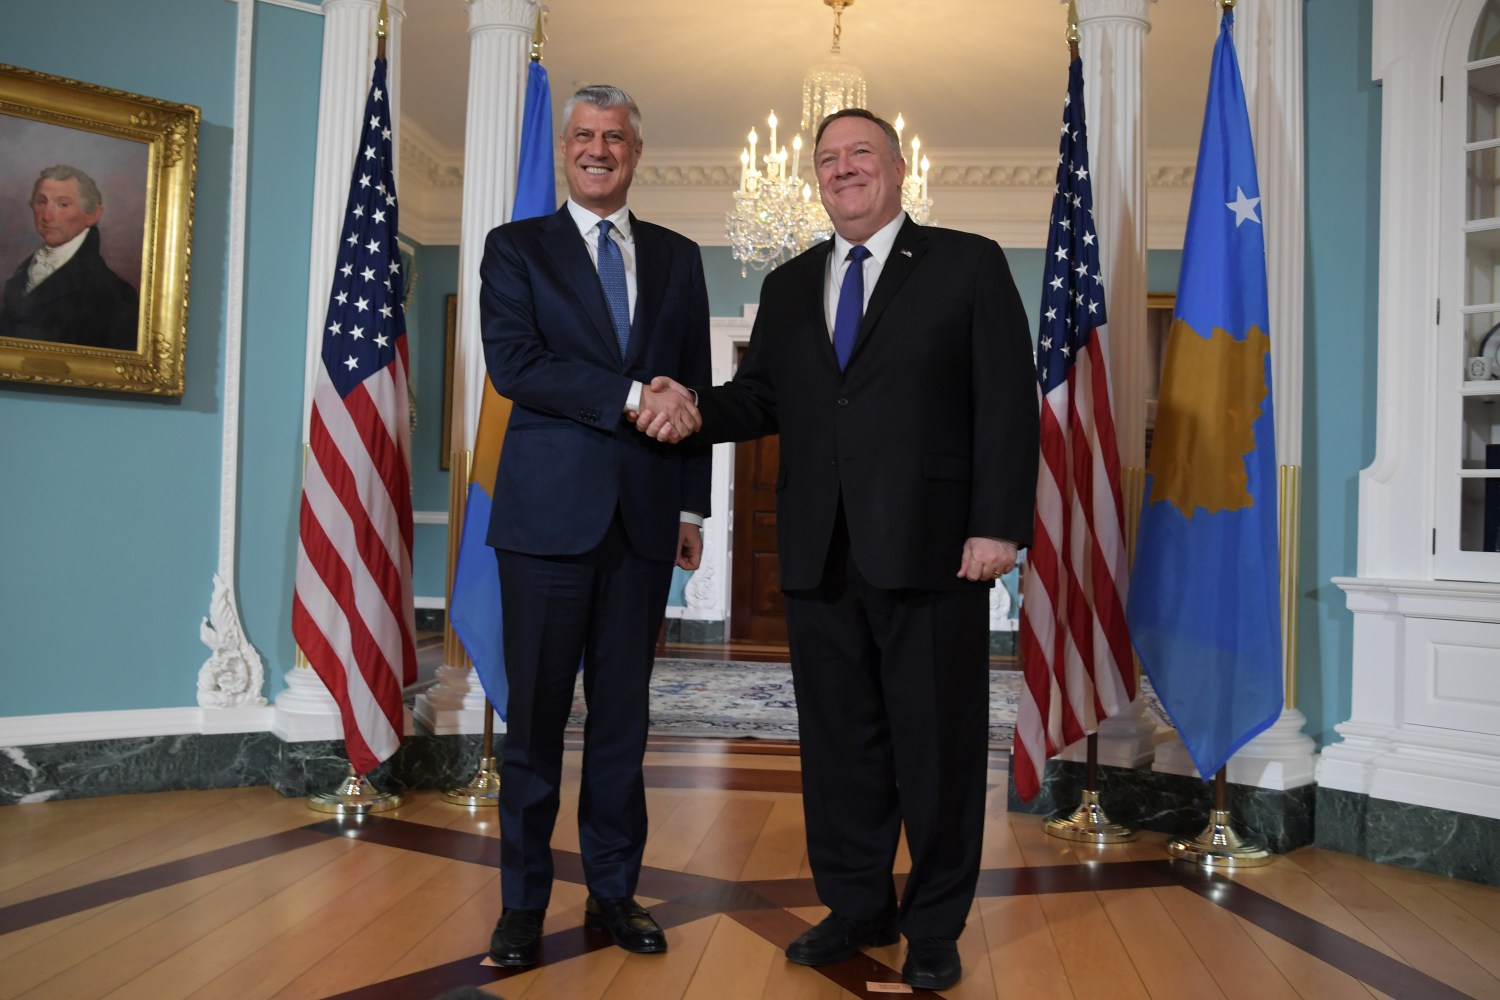 US Department of State Secretary Mike Pompeo(right) and  Kosovo President Hashim Thaci(left) hold a meeting today on February 26, 2020 at the Department of State in Washington DC, USA. (Photo by Lenin Nolly/Sipa USA)No Use UK. No Use Germany.